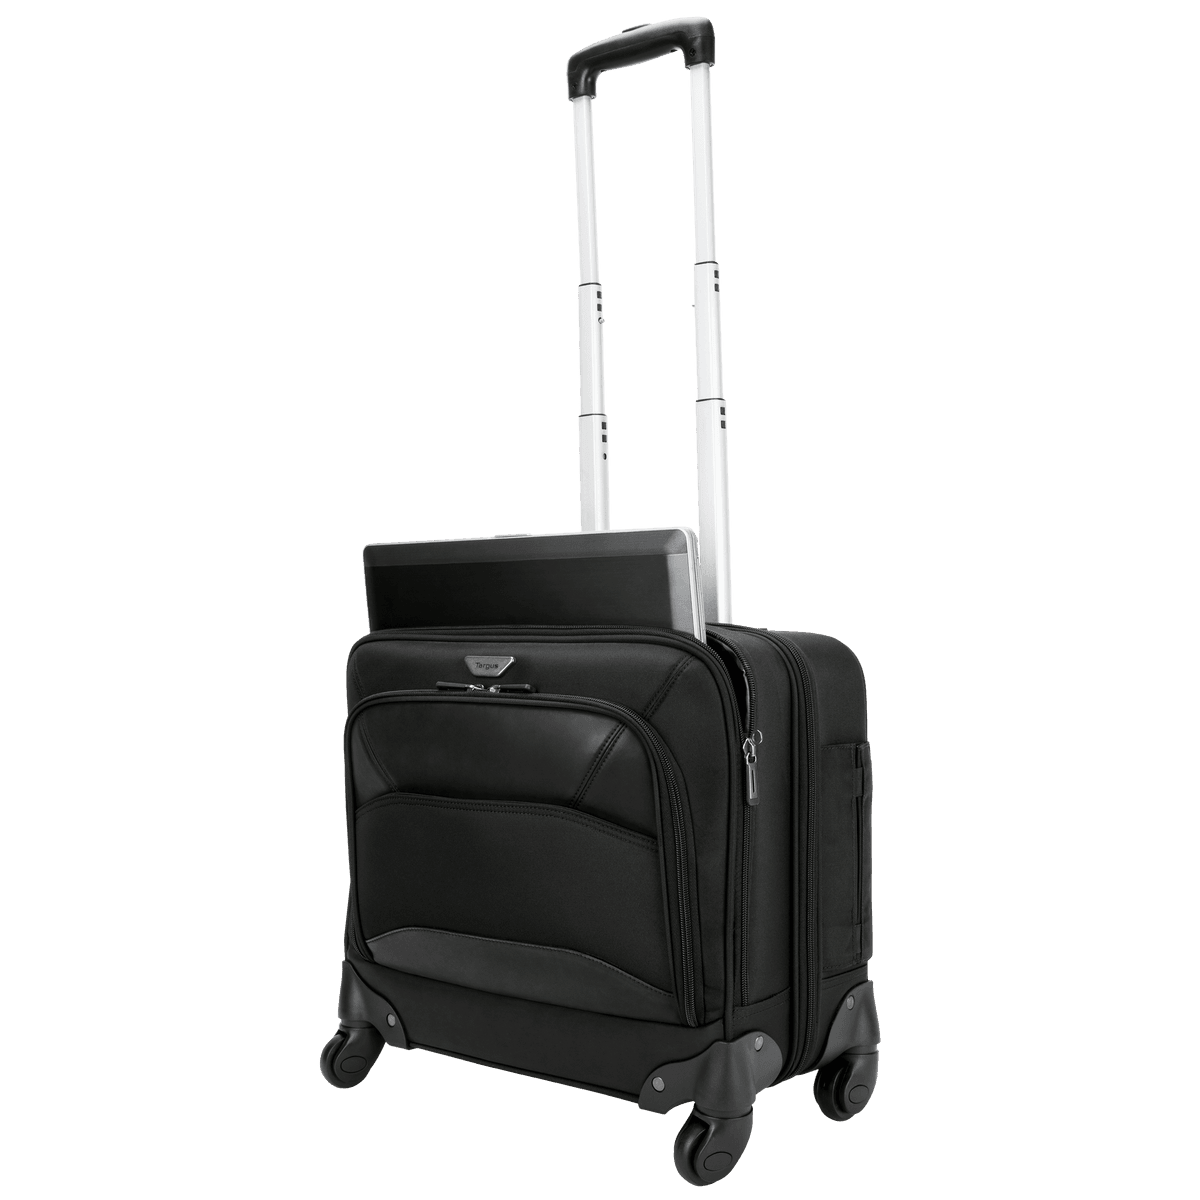 Mobile ViP 4-Wheel Rolling Suitcase with 15.6-inch Laptop Pocket